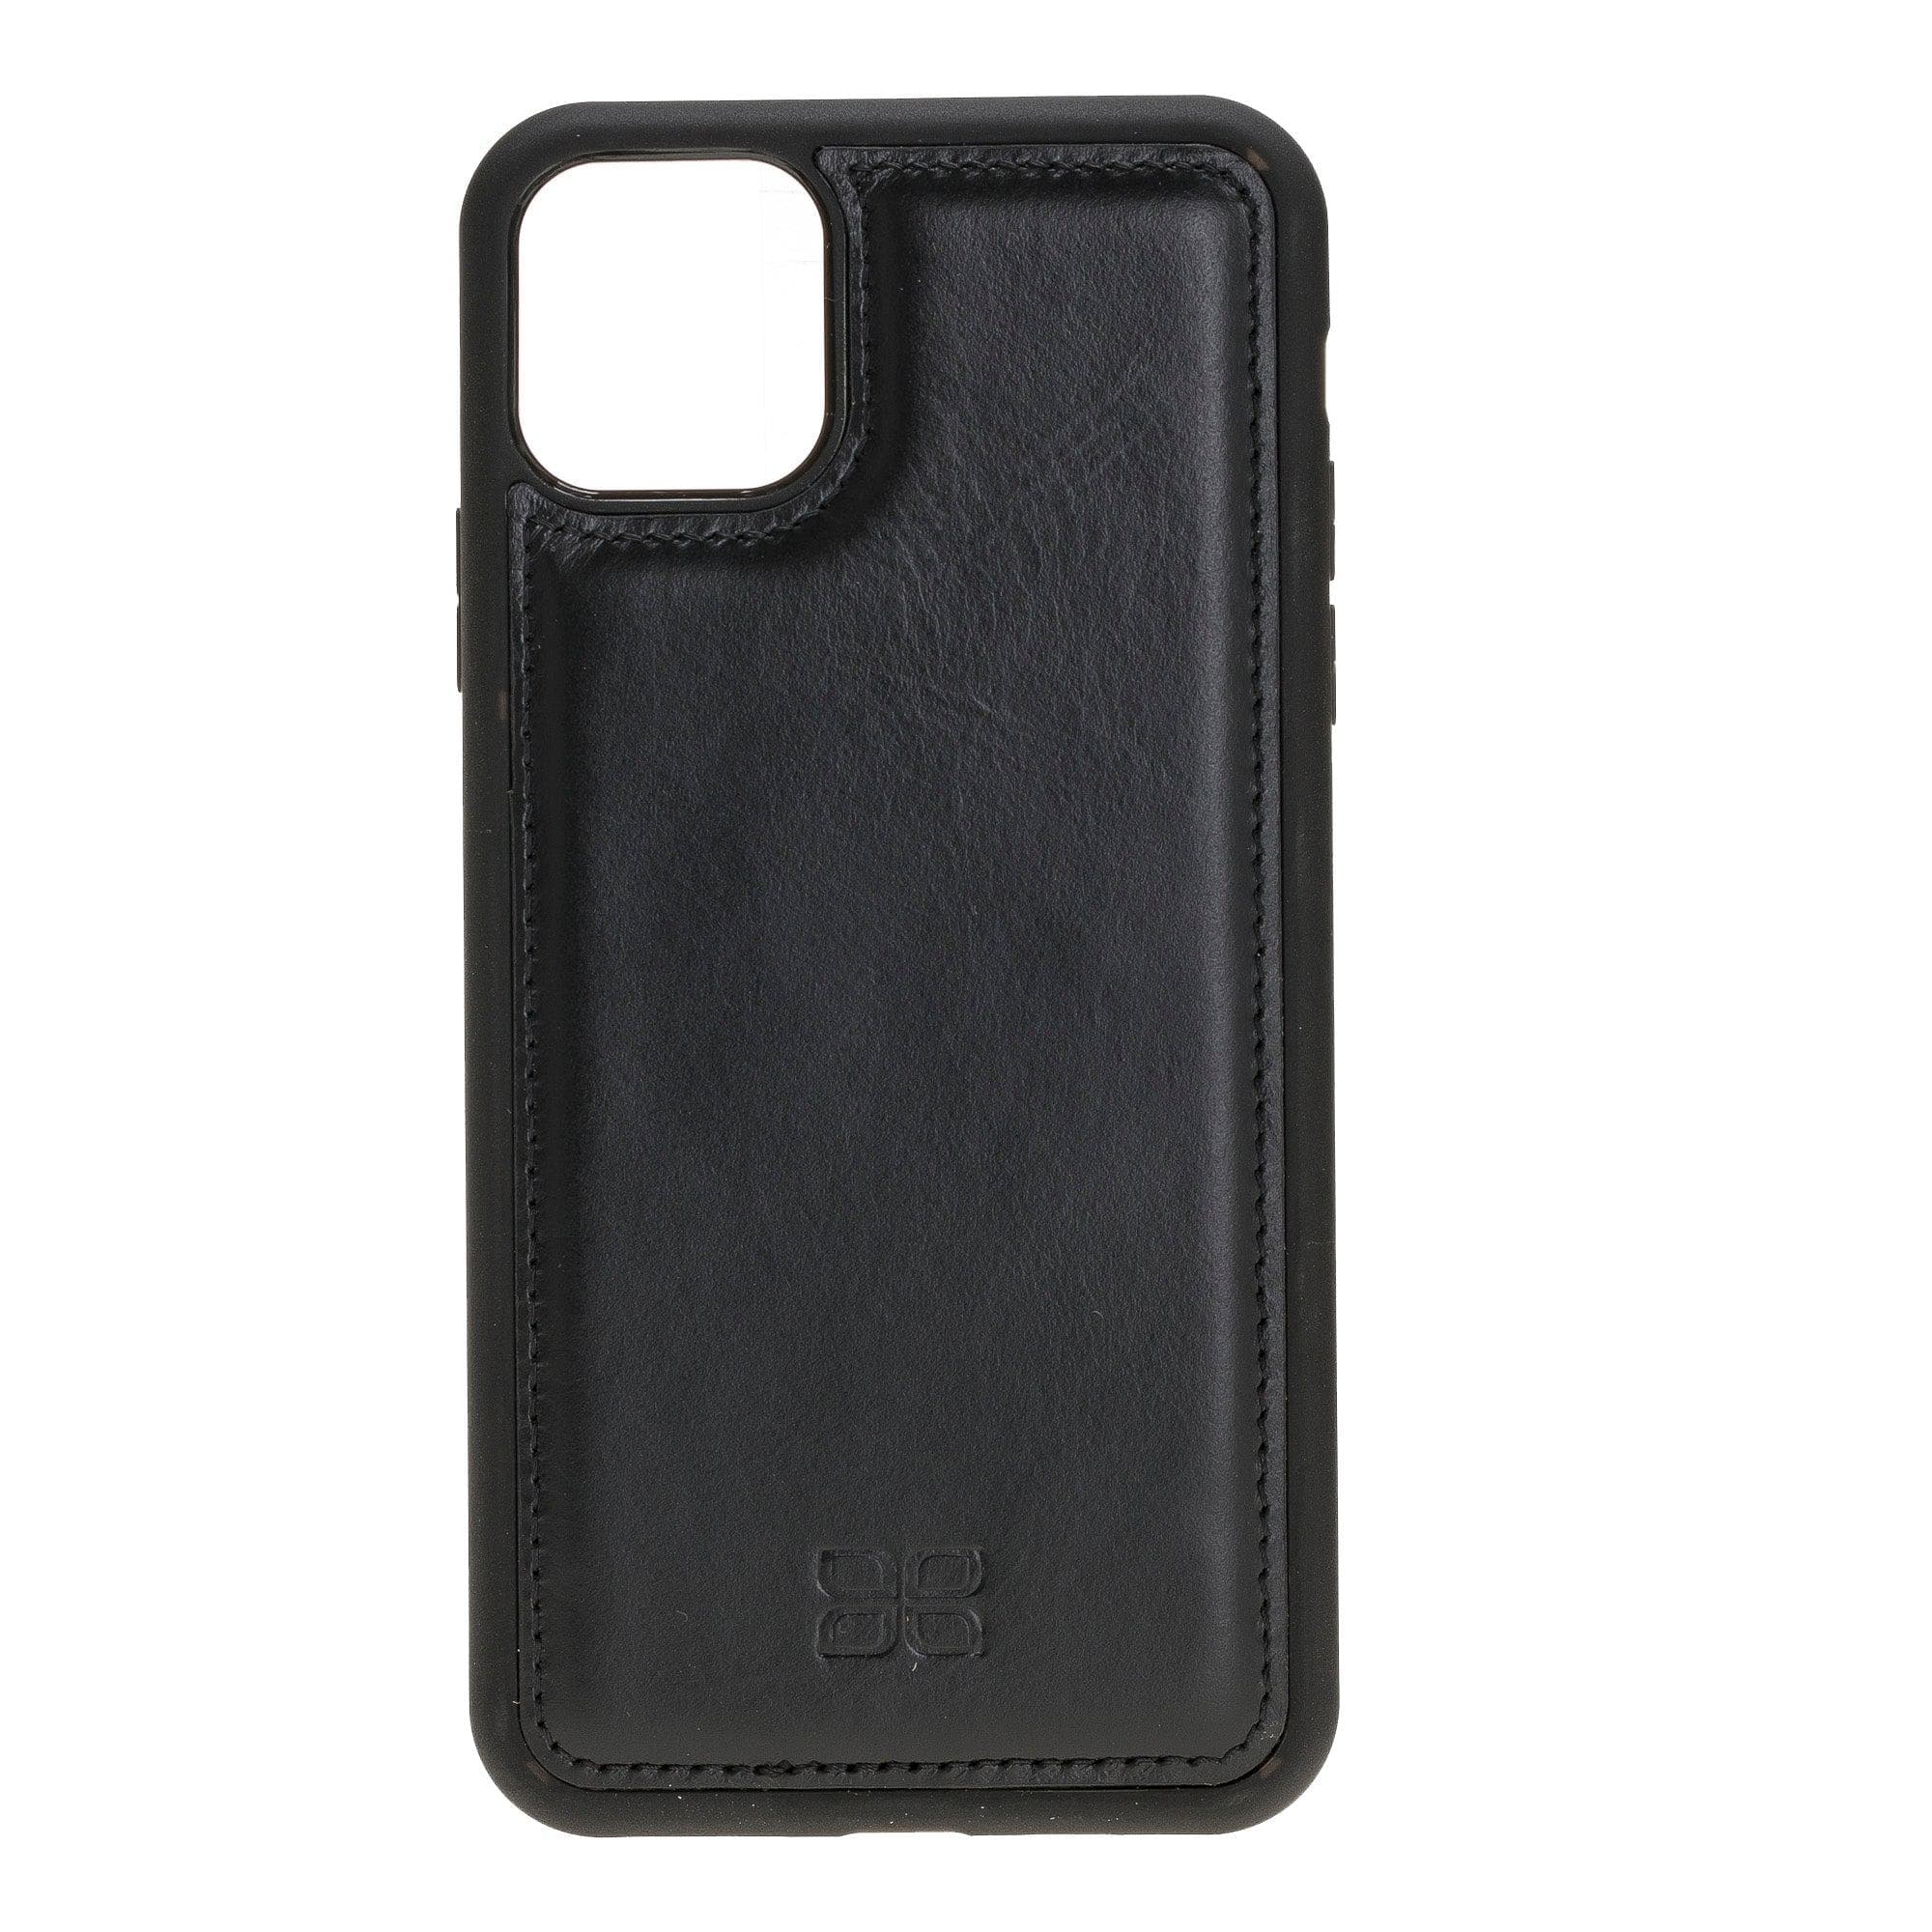 Flex Cover Leather Back Cover Case for Apple iPhone 11 Series iPhone 11 Promax 6.5" / Black Bouletta LTD